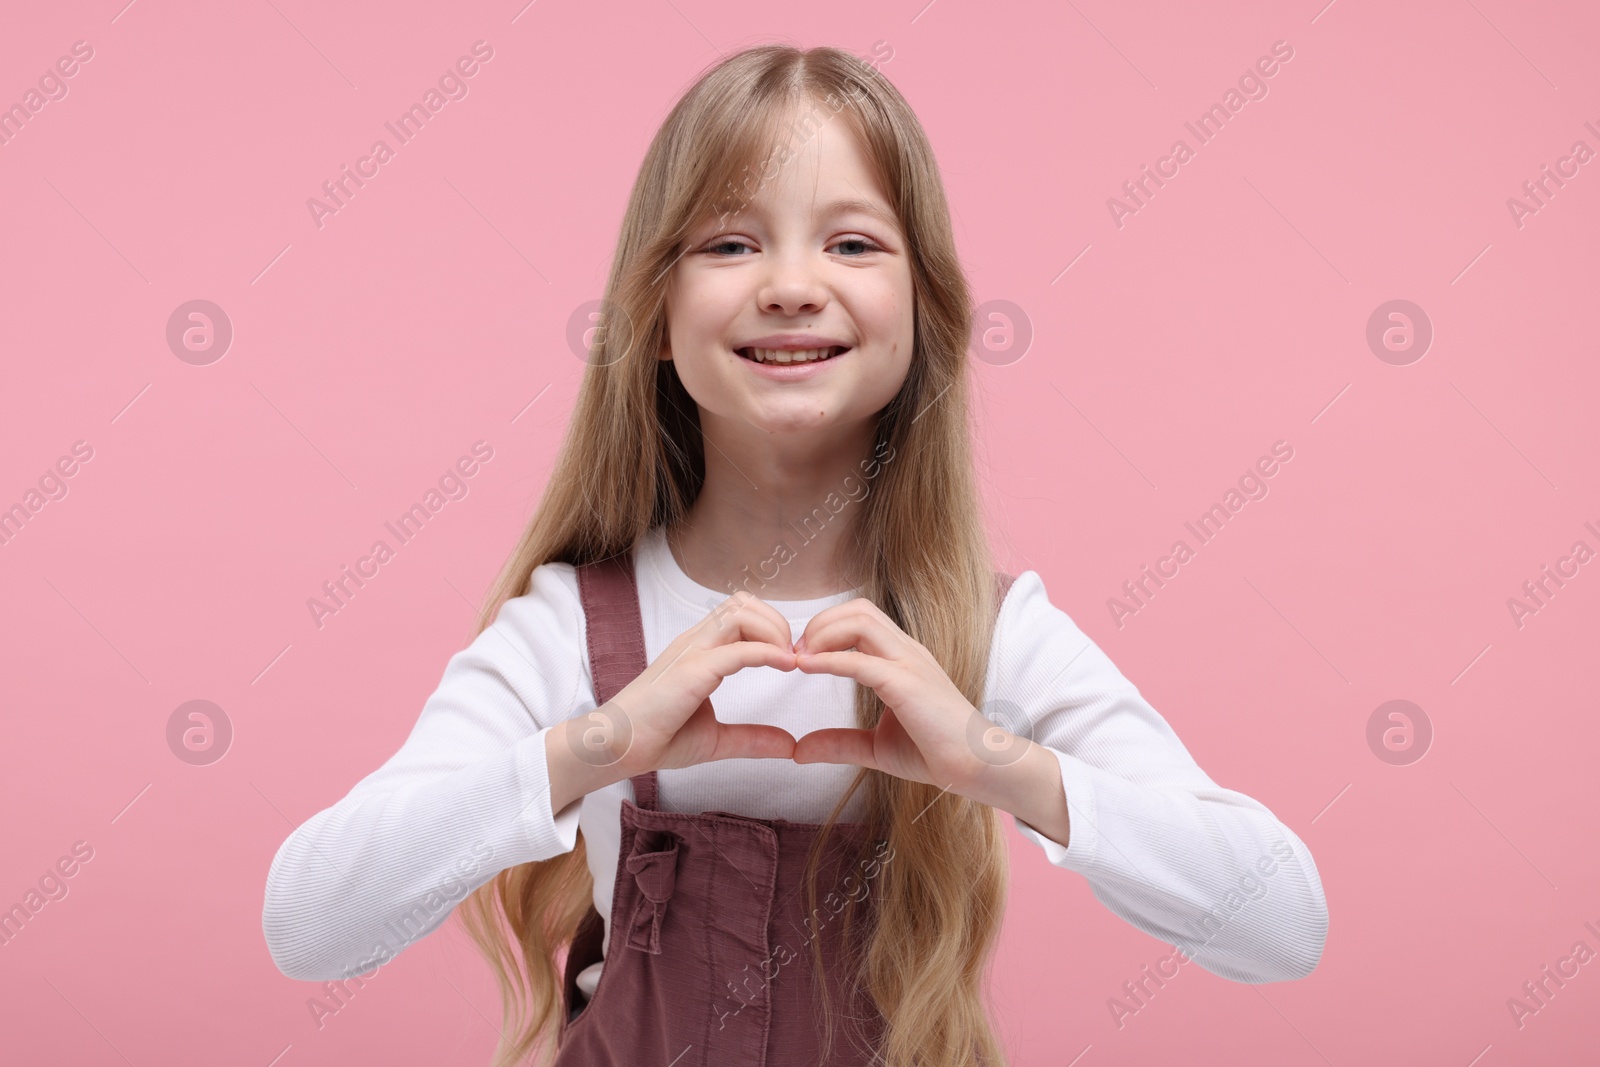 Photo of Happy girl showing heart gesture with hands on pink background